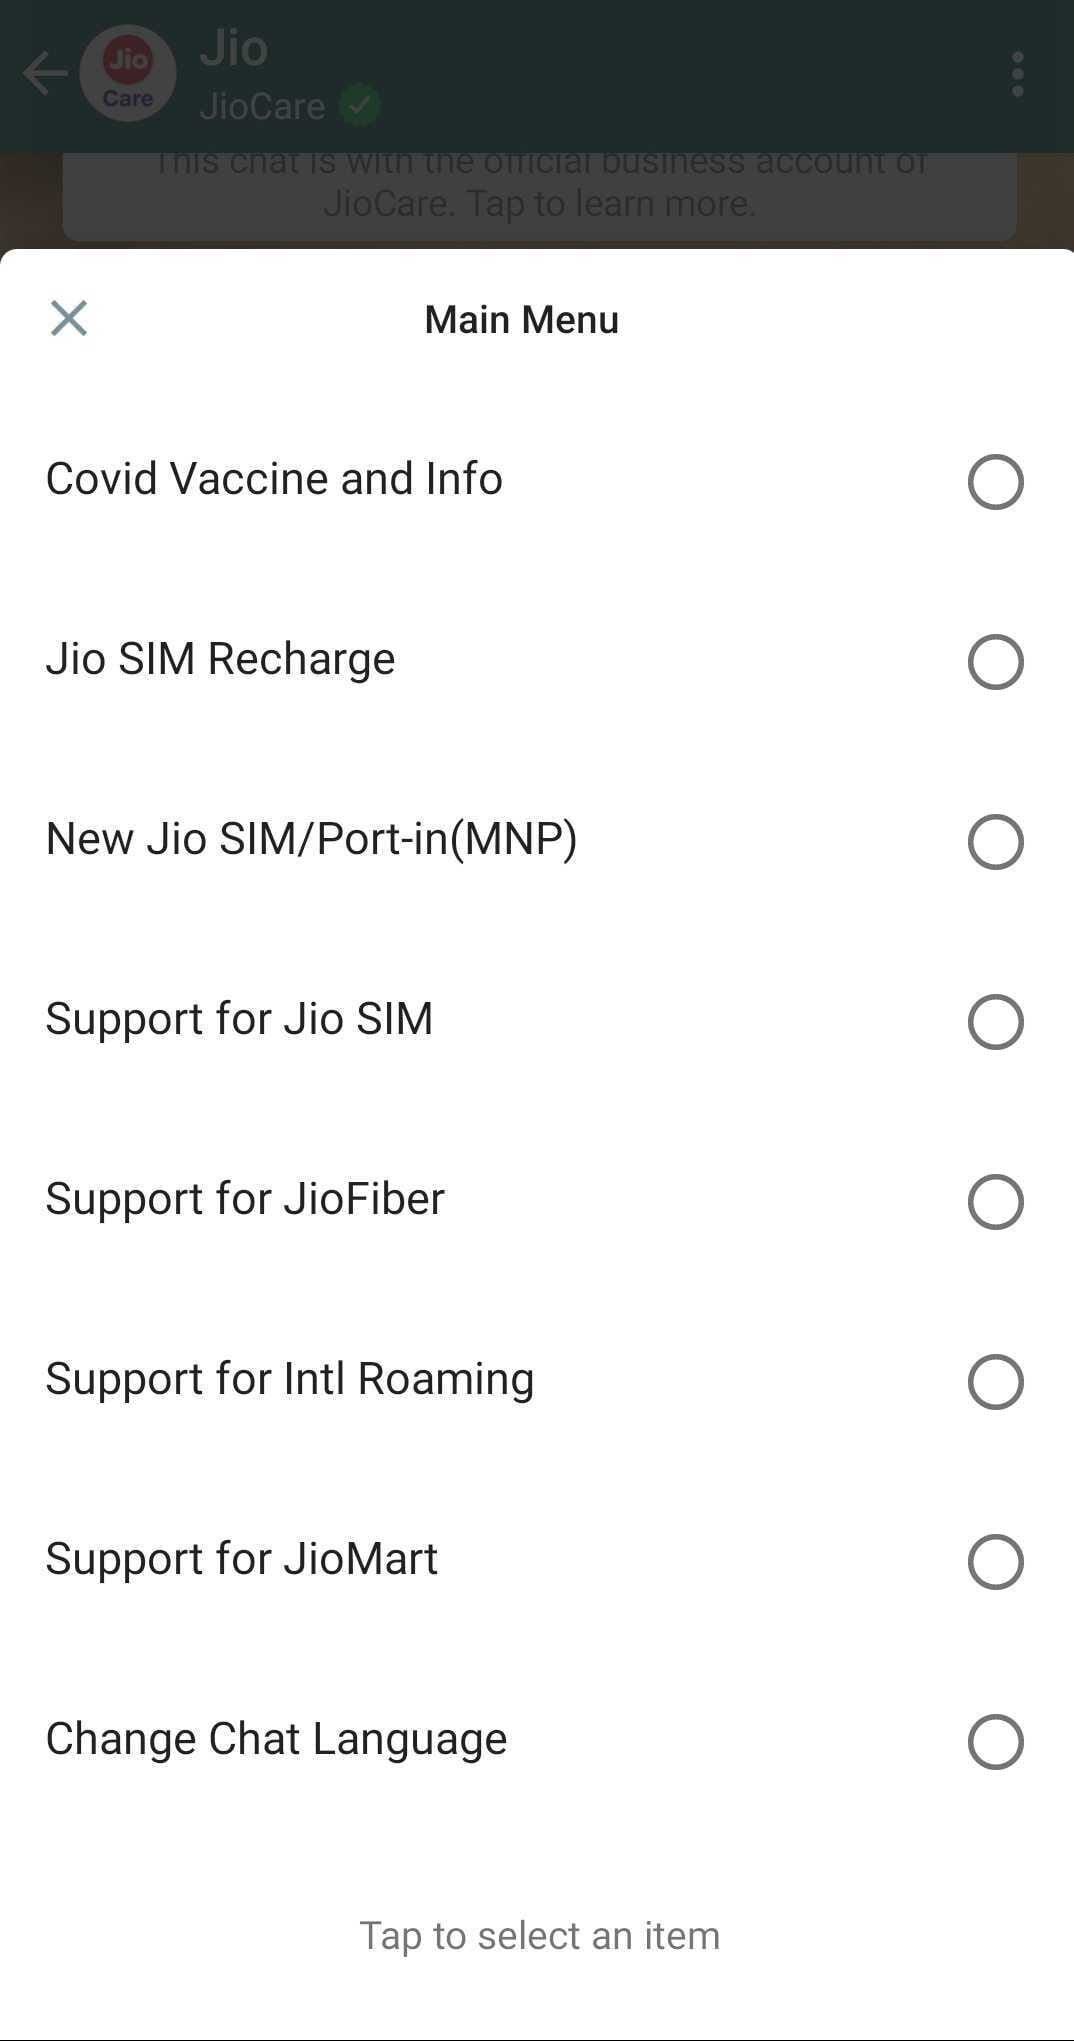 Services available for Jio users via WhatsApp. Image: Tech2